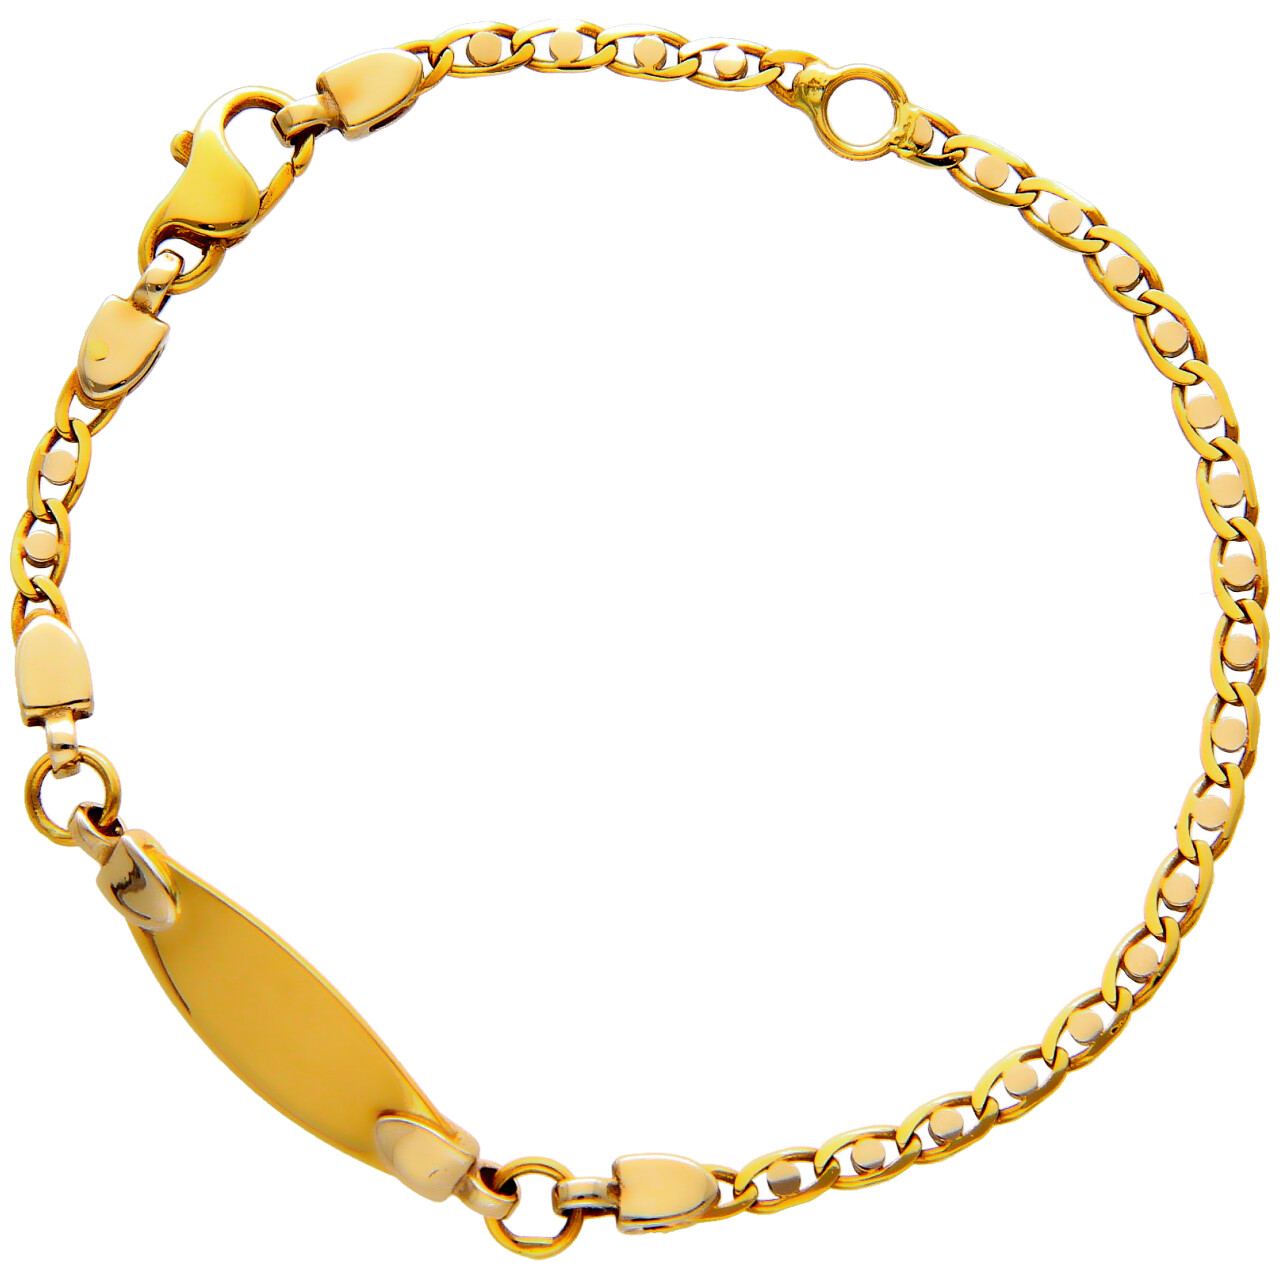 Yellow gold bracelet with nameplate